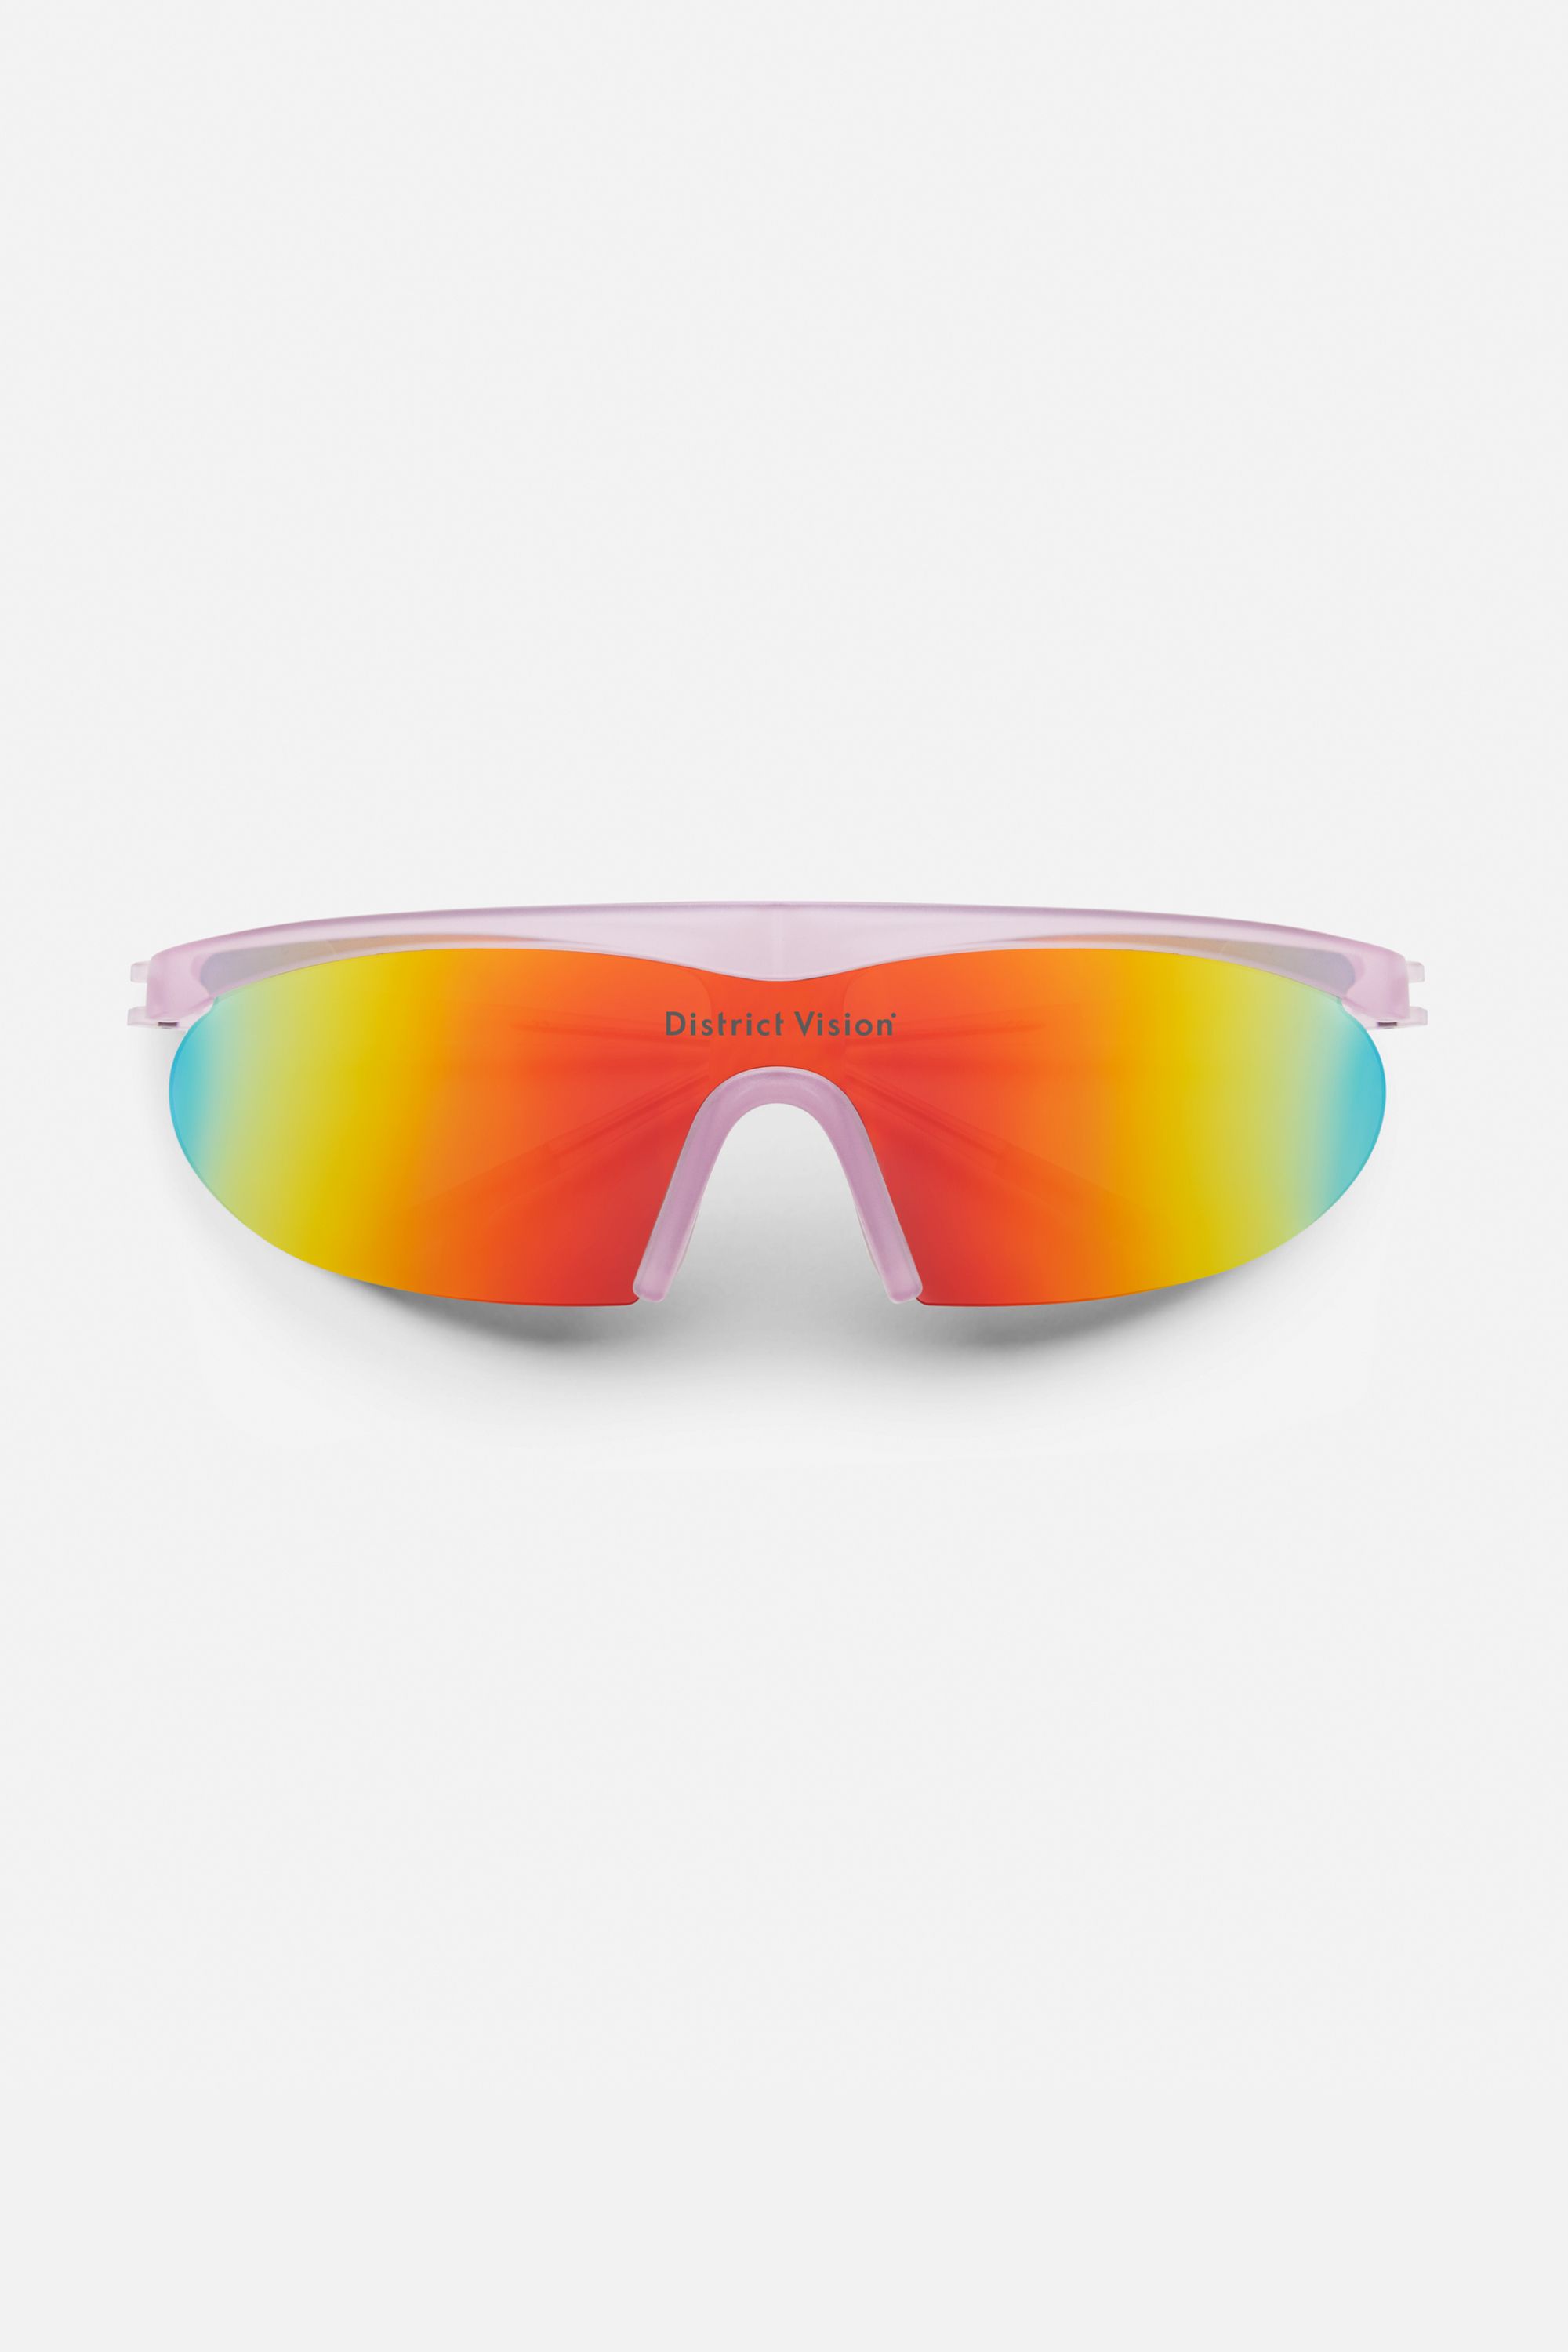 District Vision Makes Technical Running Shades That Actually Look Stylish